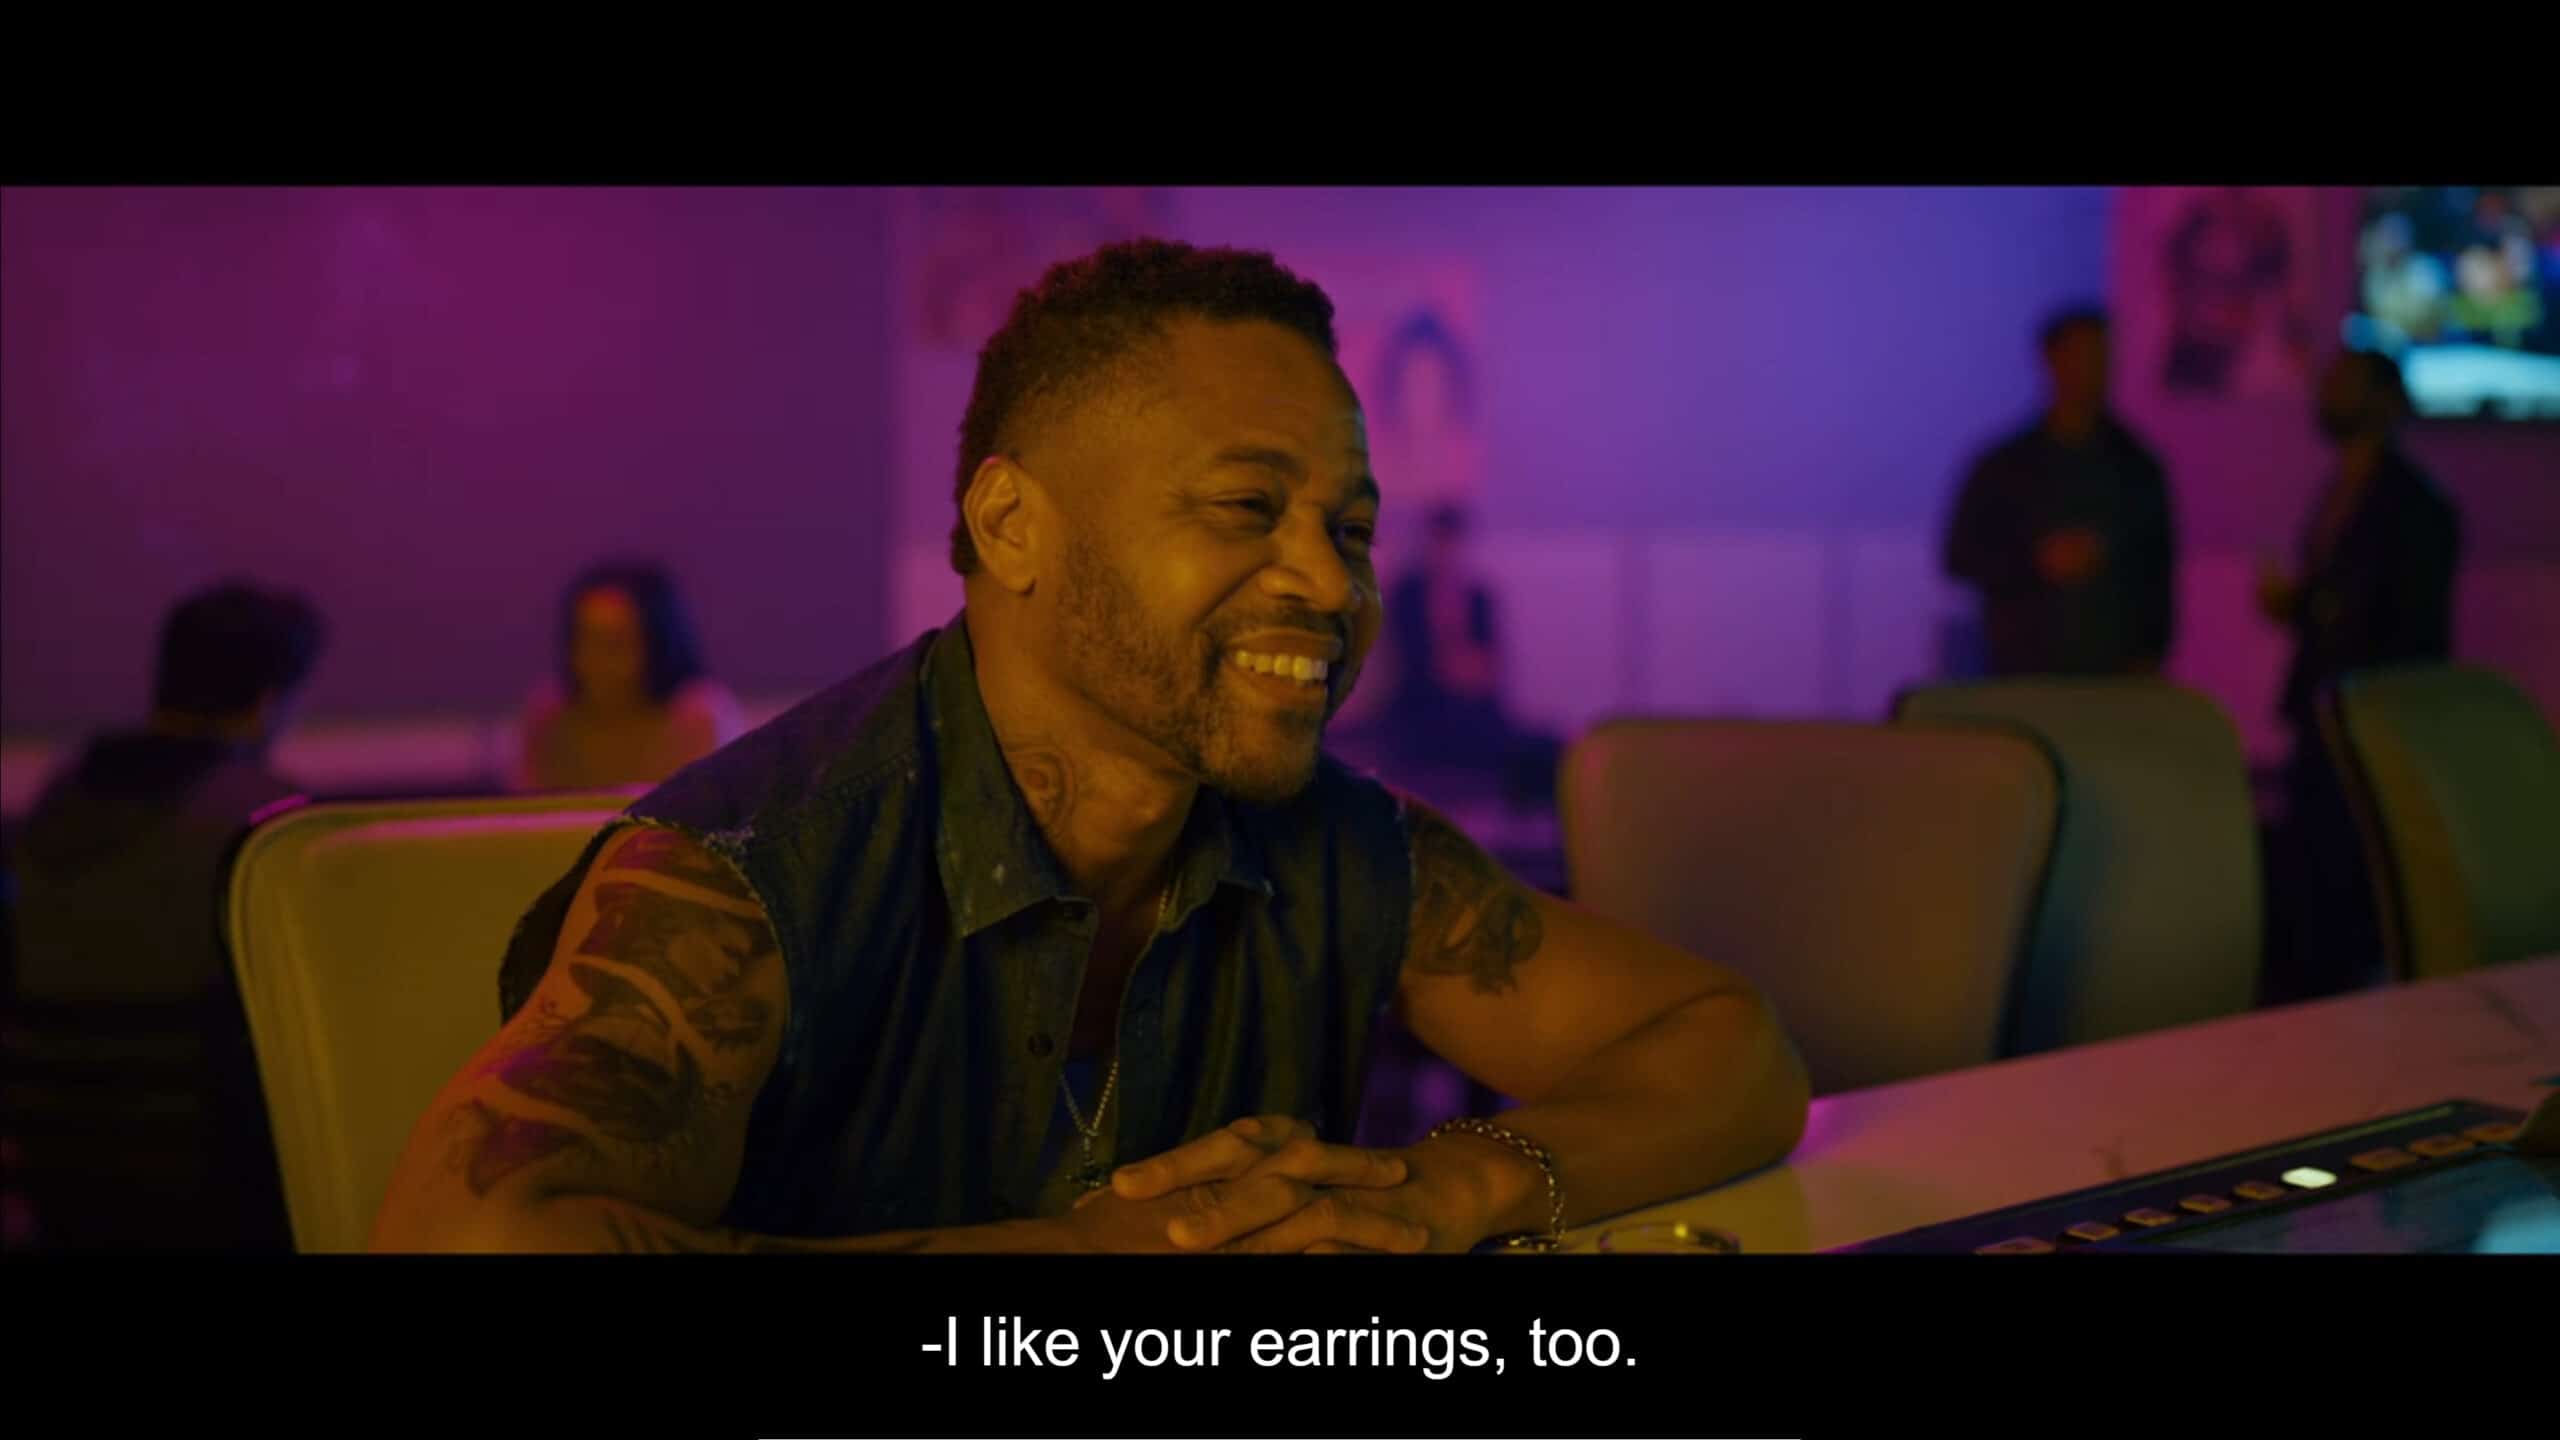 Andres (Cuba Gooding Jr.) flirting with the bartender